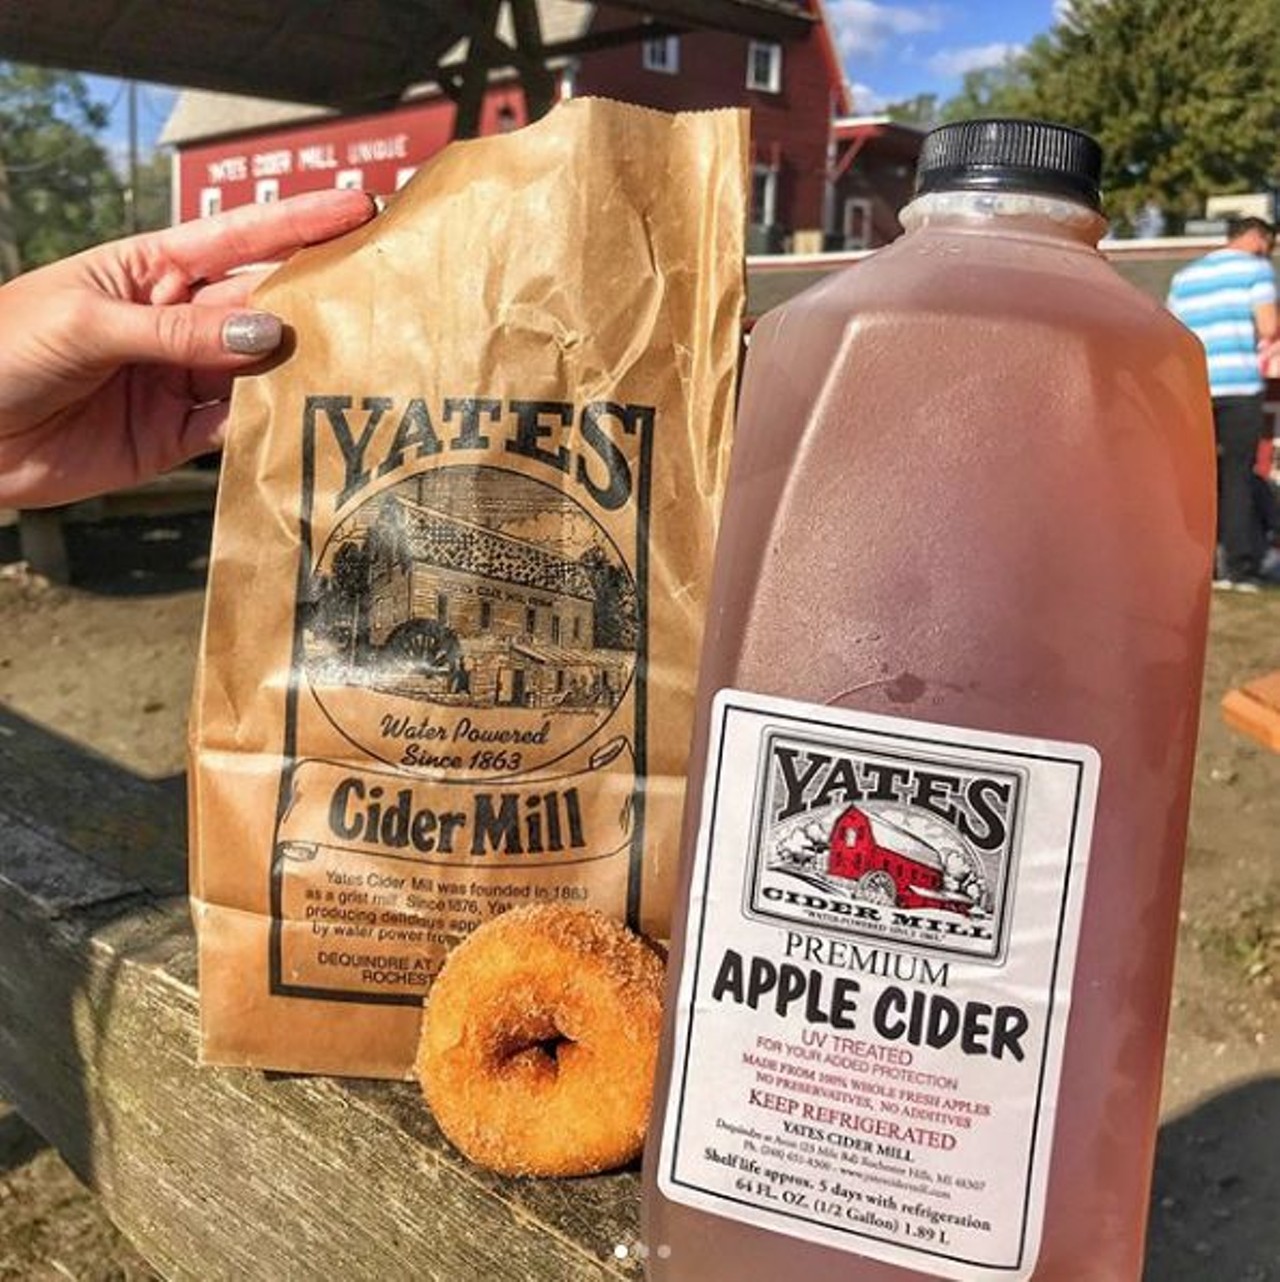 Share fall treats at a Cider Mill 
Yates Cider Mill at 1990 E Avon Rd., Rochester Hills.
&nbsp;
The Yates river walk skirts around the Clinton River, offering a gorgeous scenic stroll as the leaves turn colorful and crunchy. It&#146;s a great place to meander, see baby goats and eat classic fall treats. The donuts come in plain, powdered and cinnamon sugar - plus, there&#146;s cider, fudge, caramel apples, and a grill. And if Yates is a bit of a drive, there are a number of other cider mills scattered across southeast Michigan - each with their own amenities, but all prime for a fall date night. Free admission, splurge and stockpile food at your own discretion. Photo via @eat_detroit.